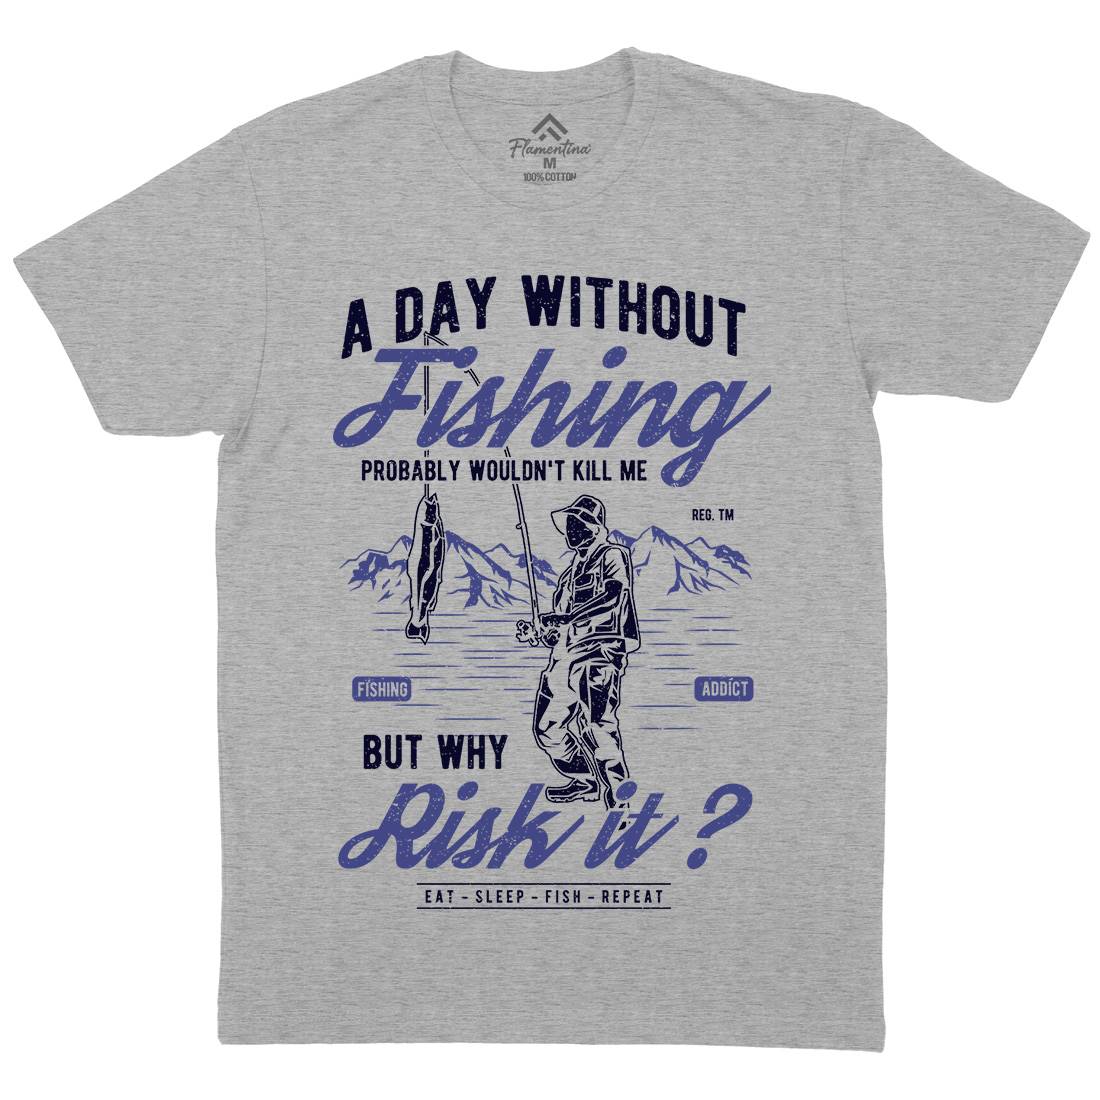 A Day Without Mens Organic Crew Neck T-Shirt Fishing A602